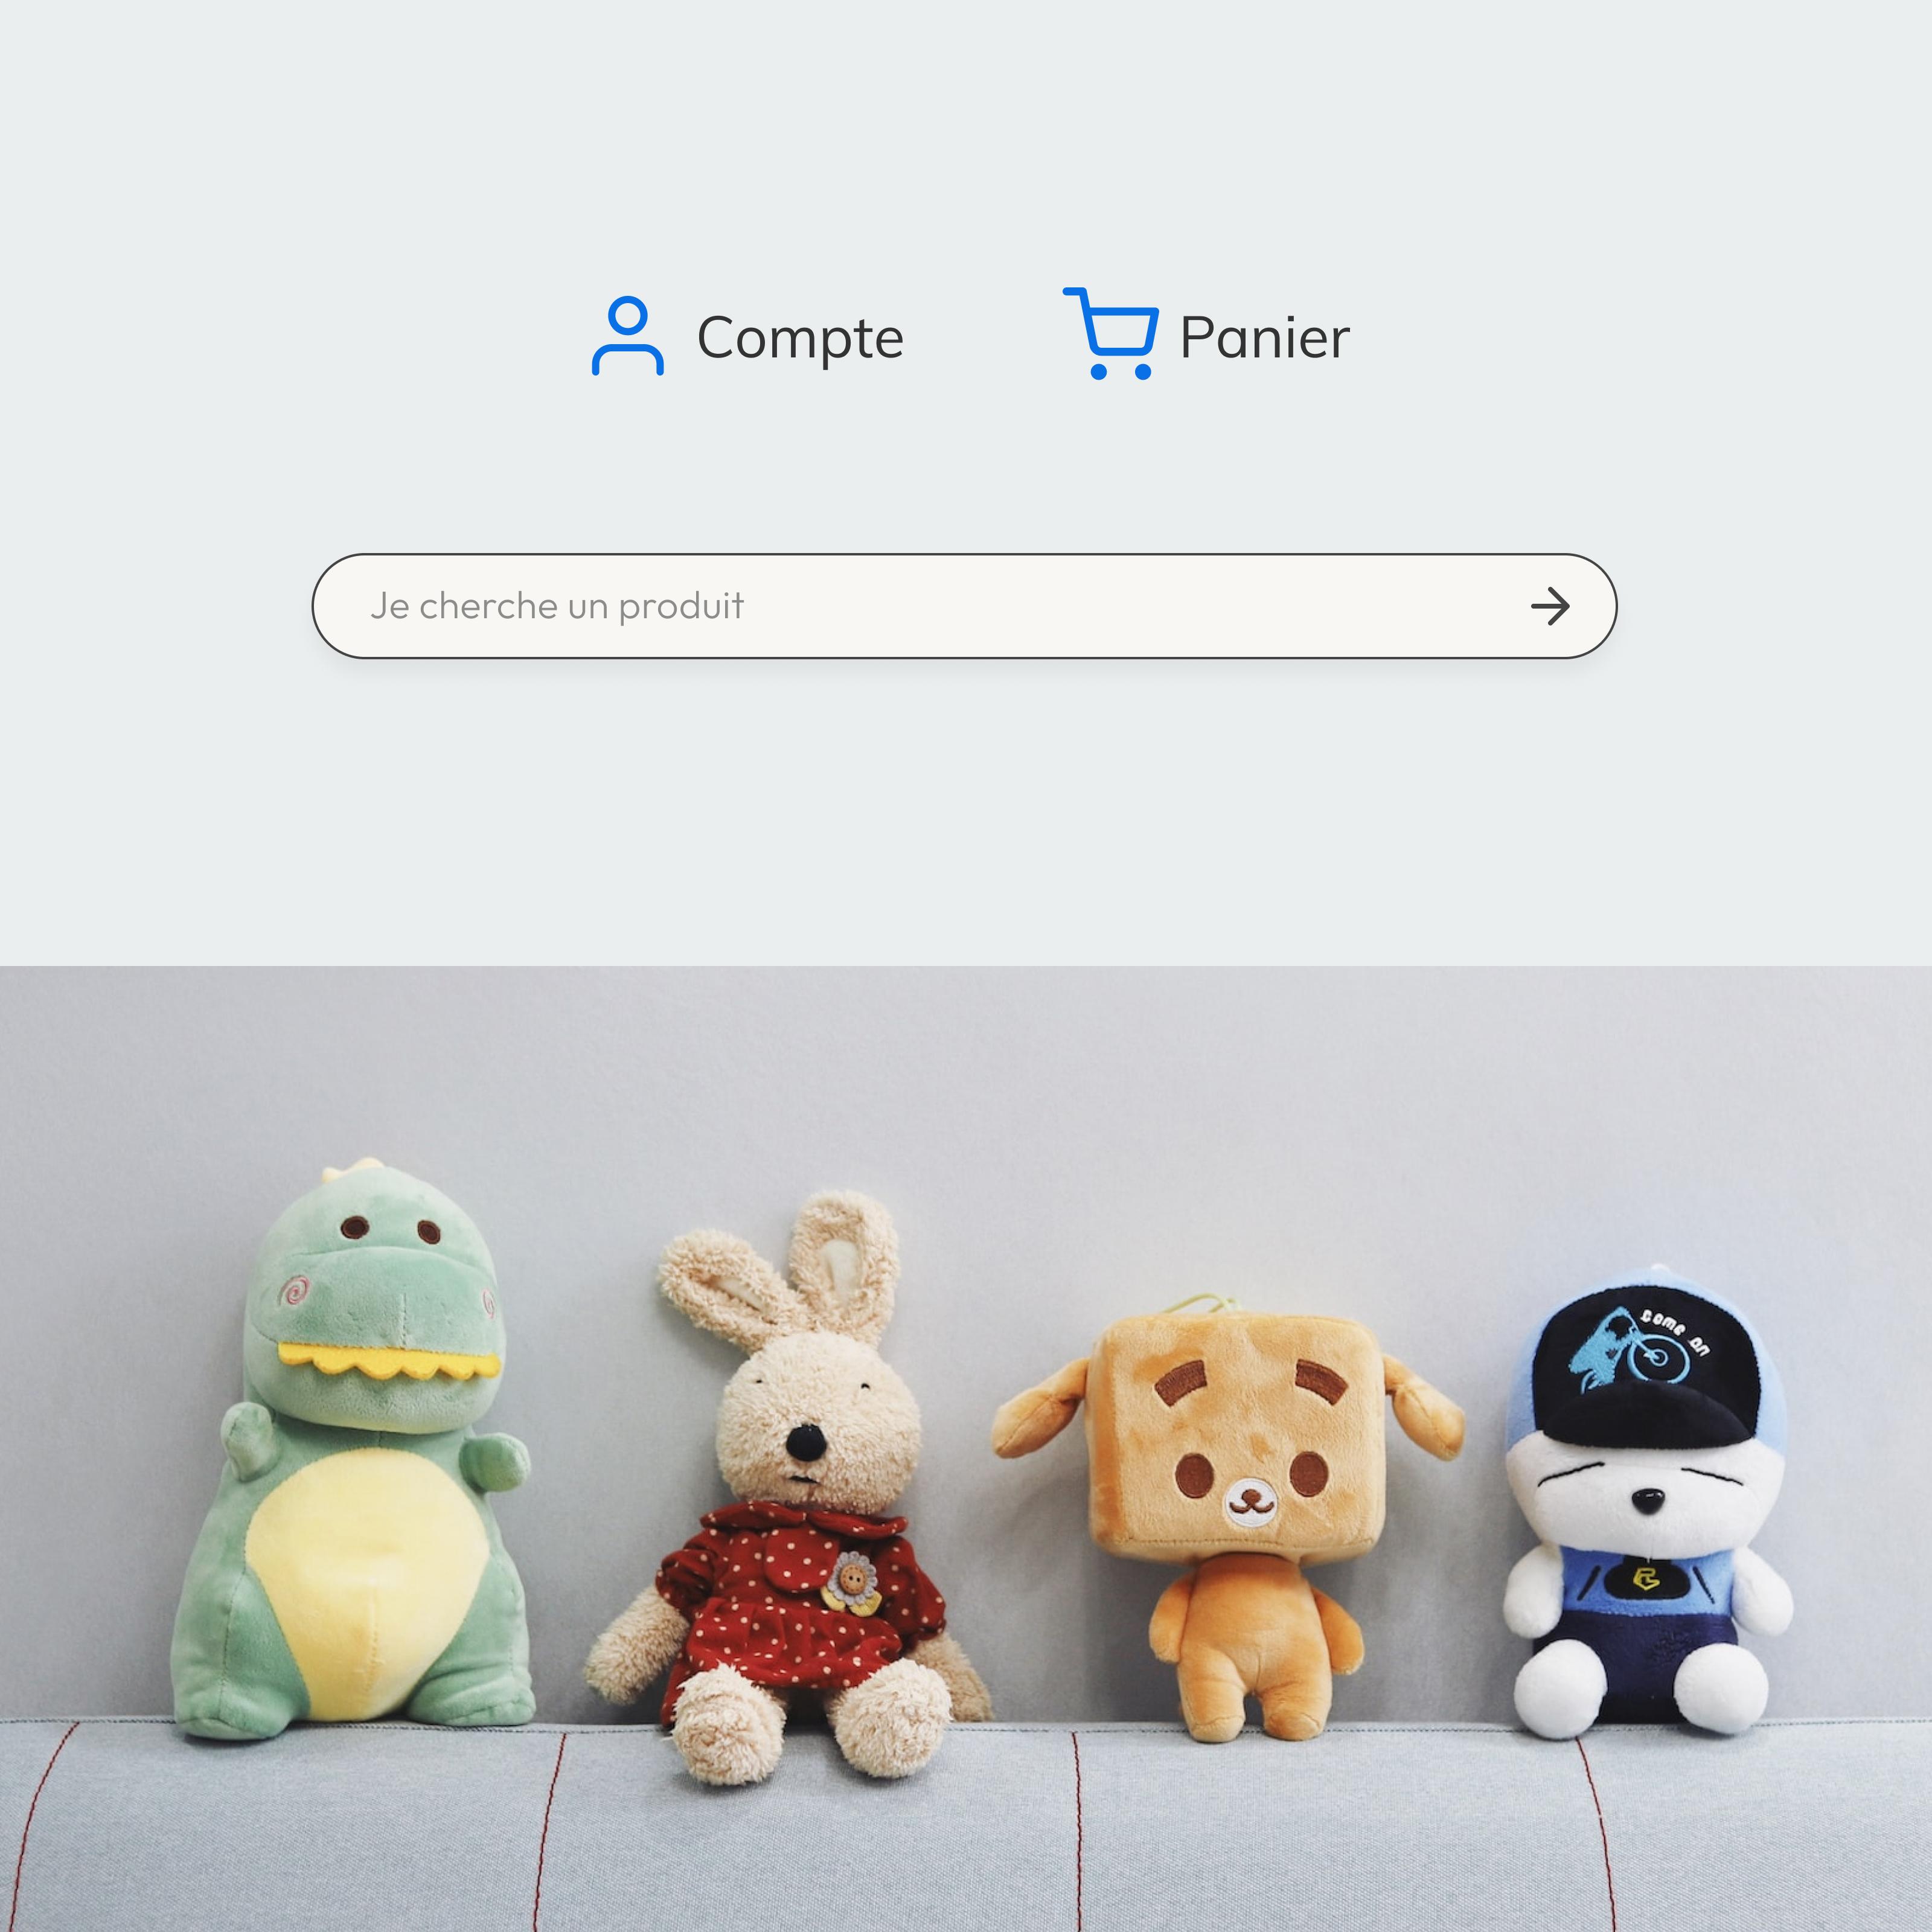 examples of ui and plush toys